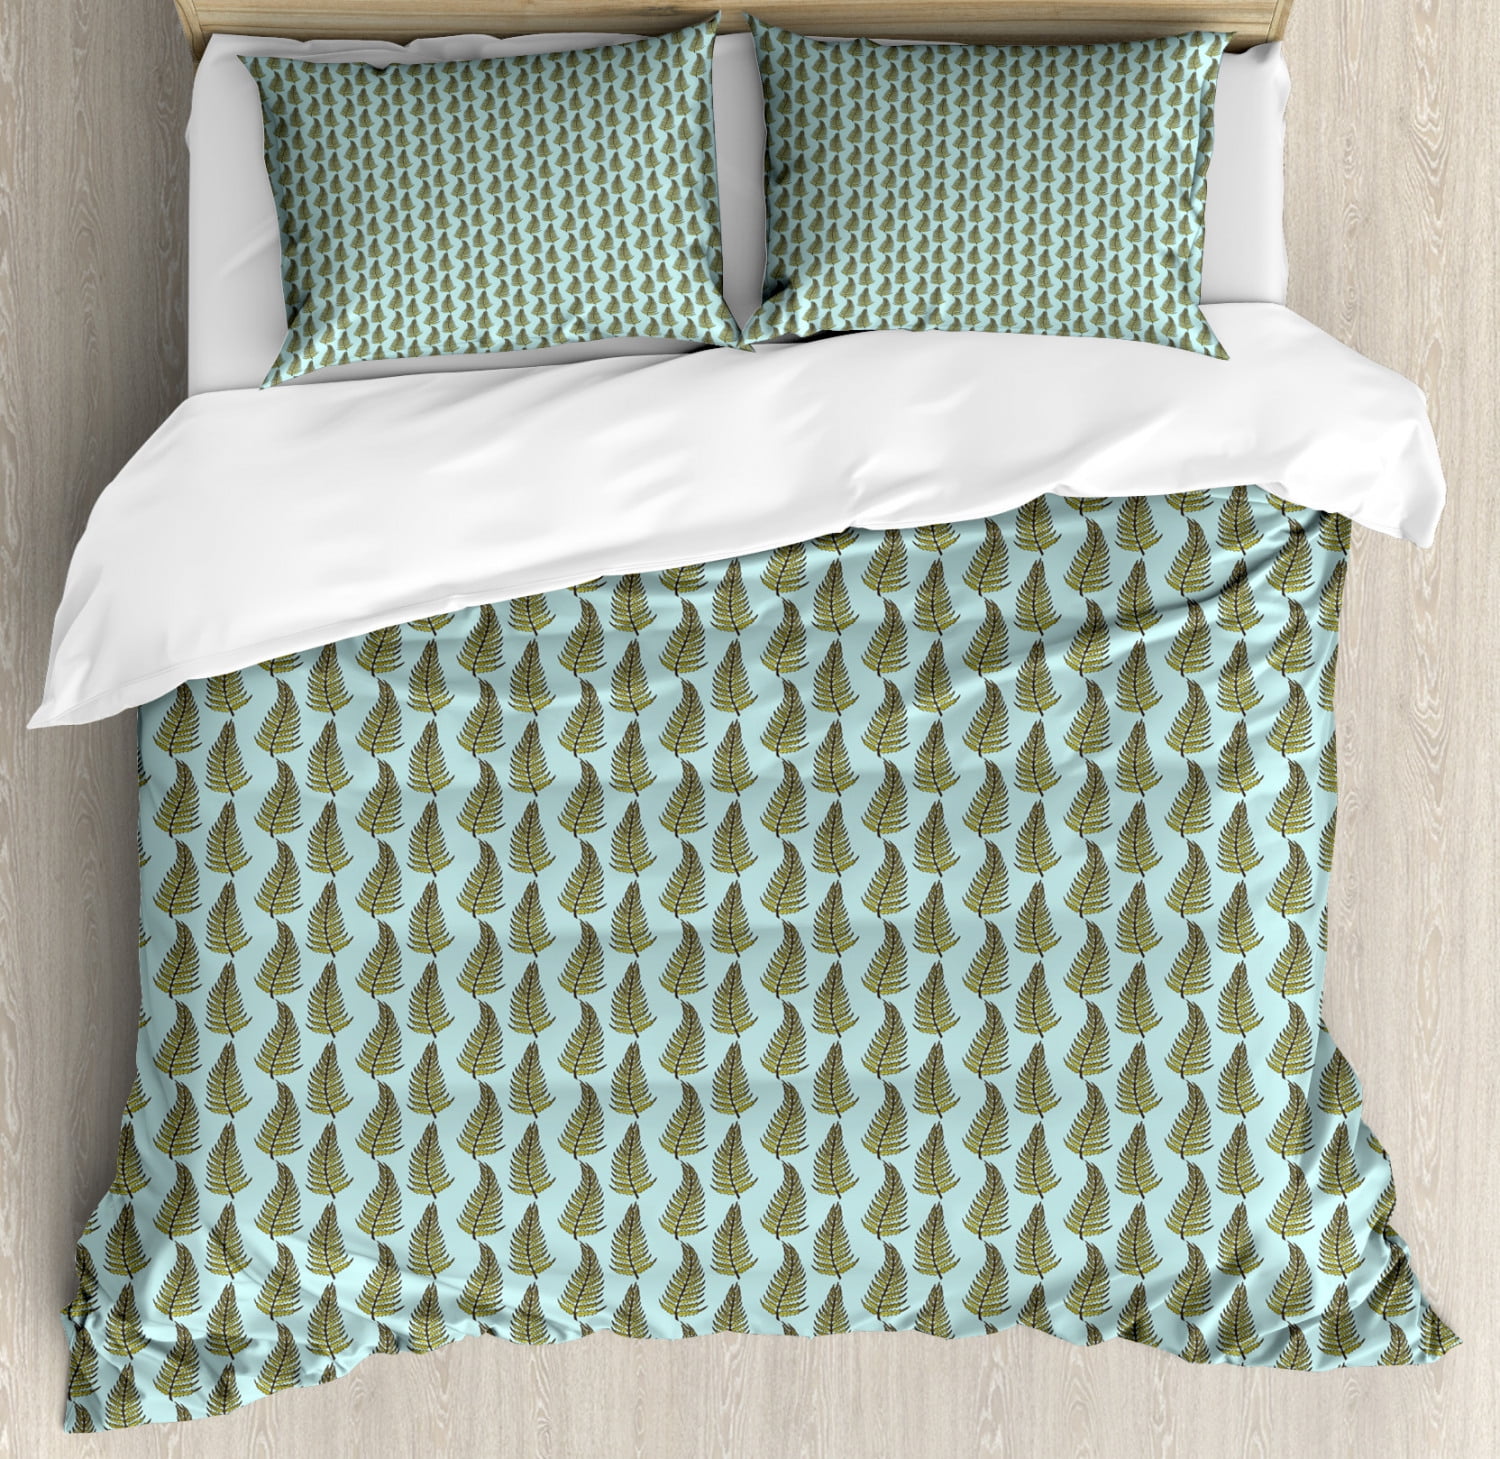 Fern Duvet Cover Set Pastel Composition With Curved Abstract